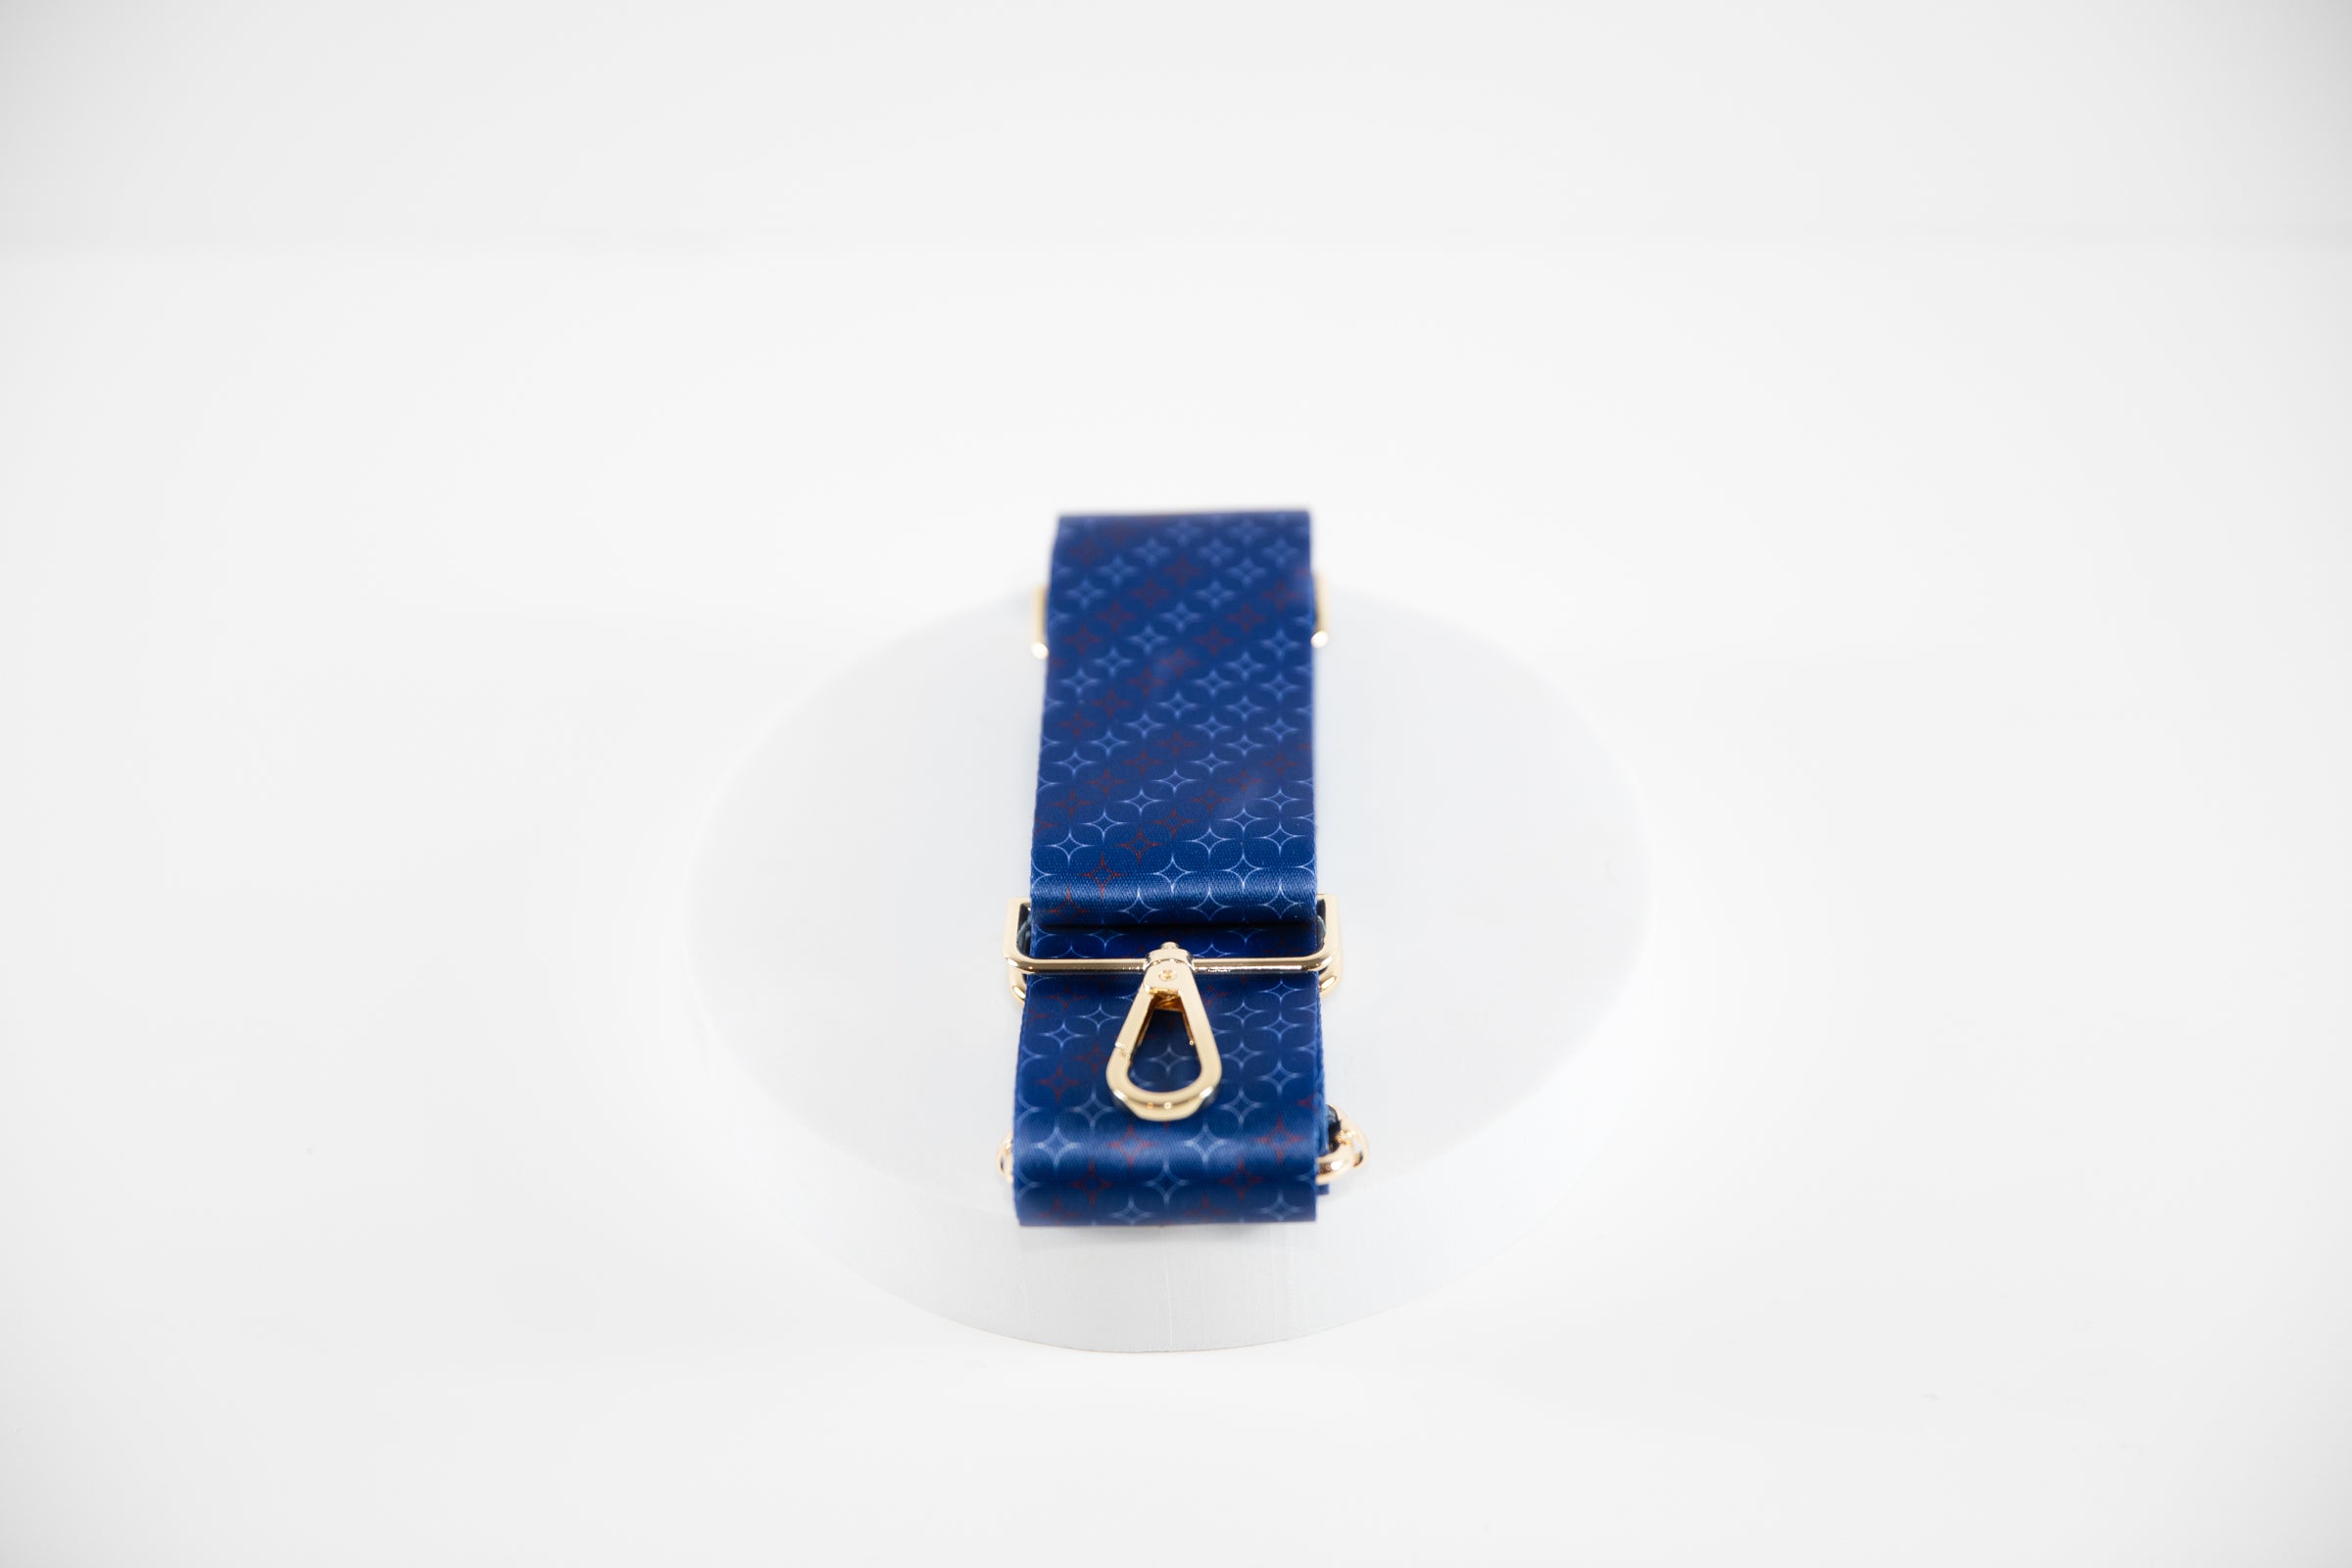 Elegant crossbody strap shown in red, white, and blue team colors of the Chicago Cubs.